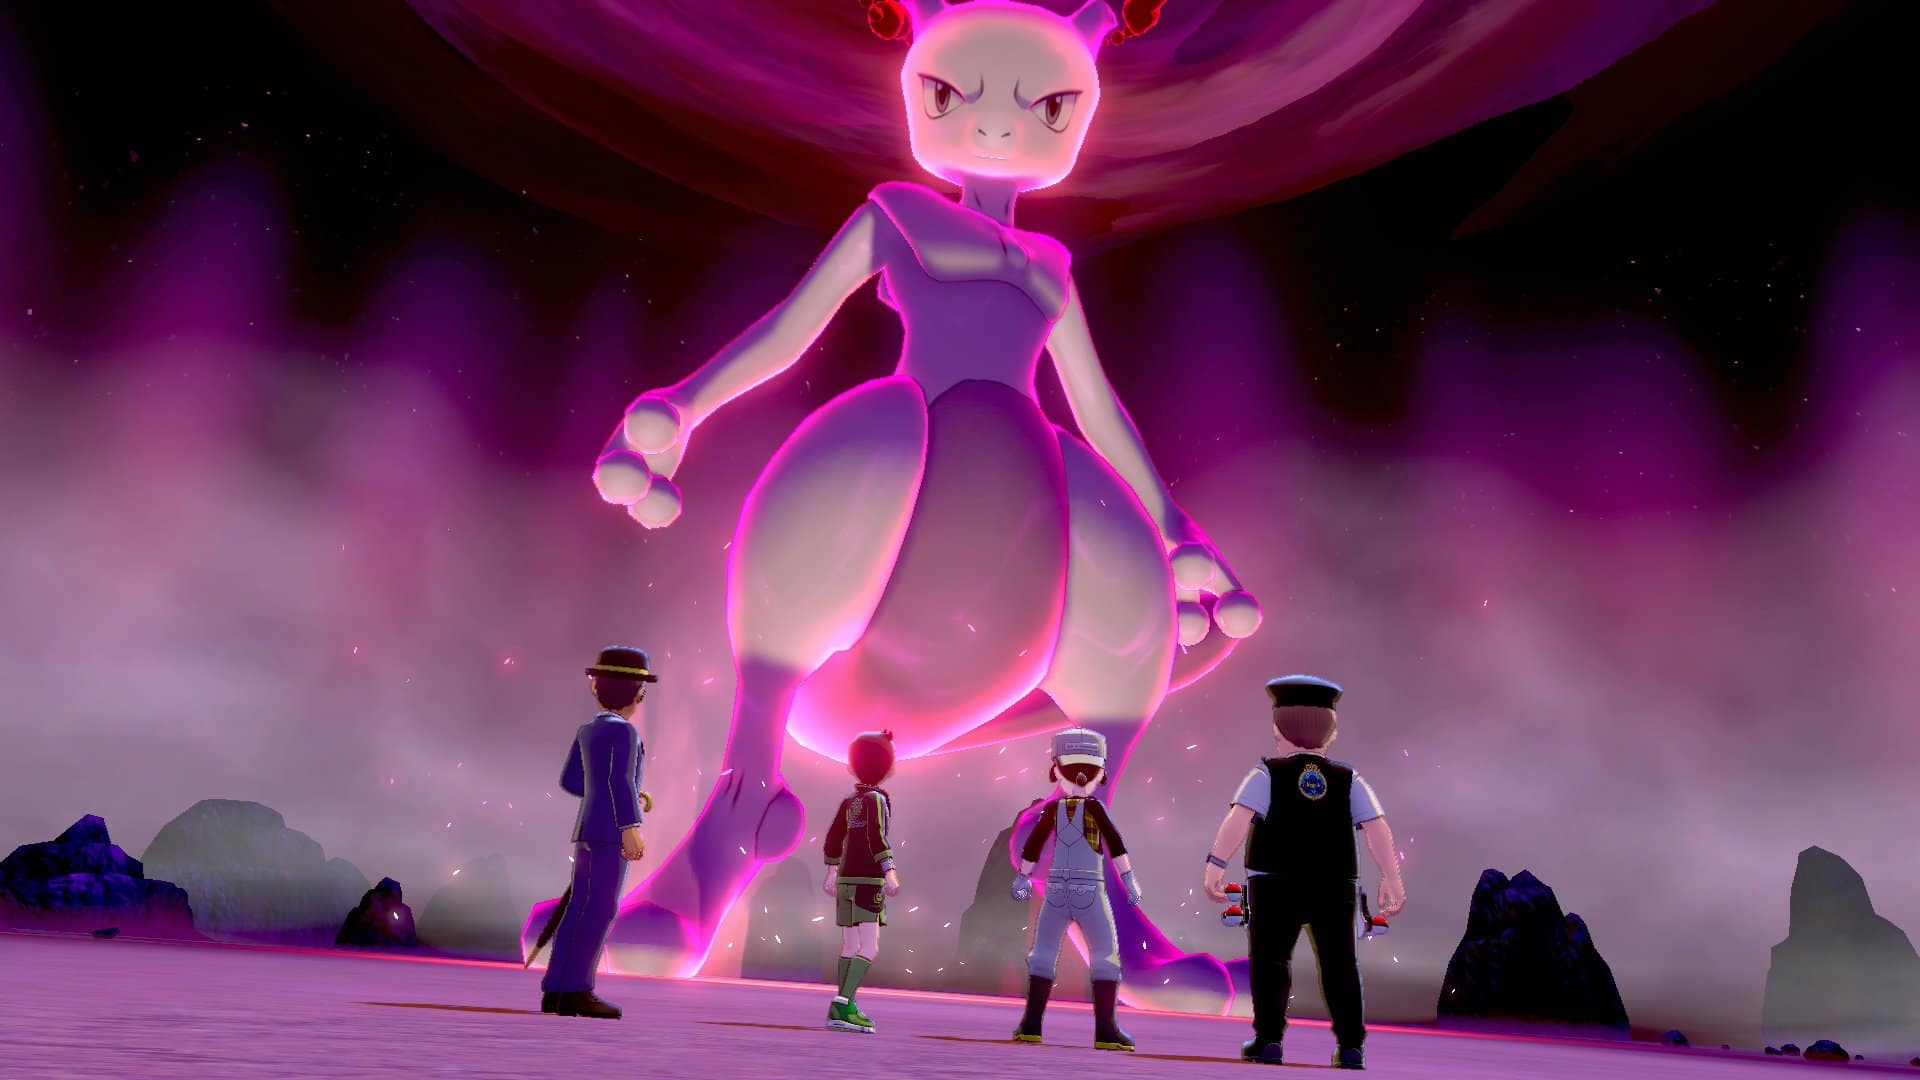 Image for Mewtwo, Bulbasaur, Charmander and Squirtle are currently appearing in Pokemon Sword & Shield raid battles